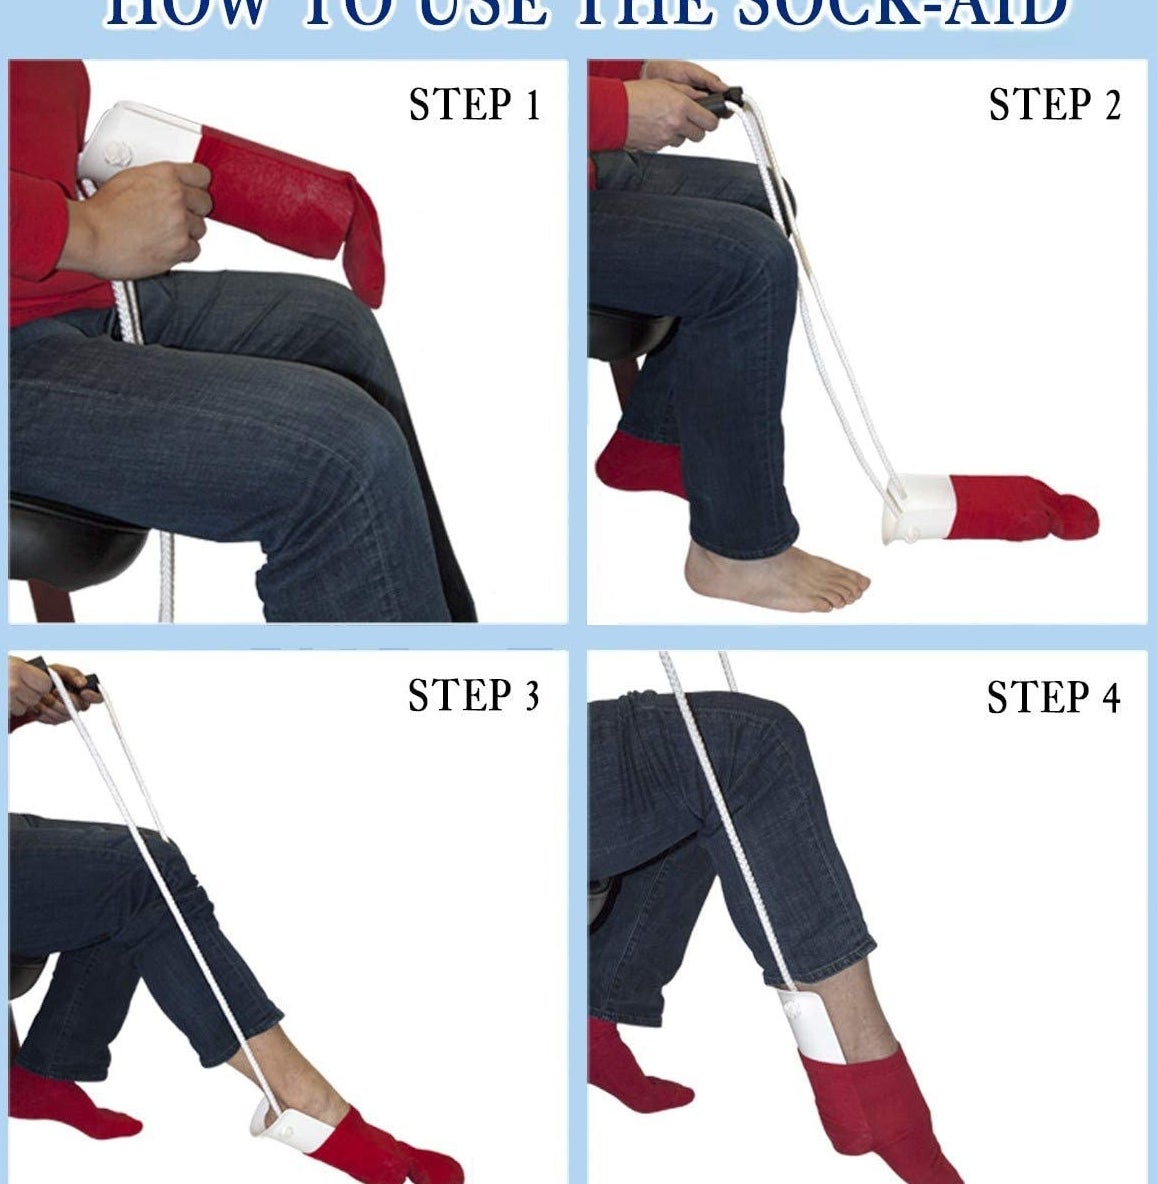 four steps of person using the curved piece of plastic with ropes attached to slip on a sock